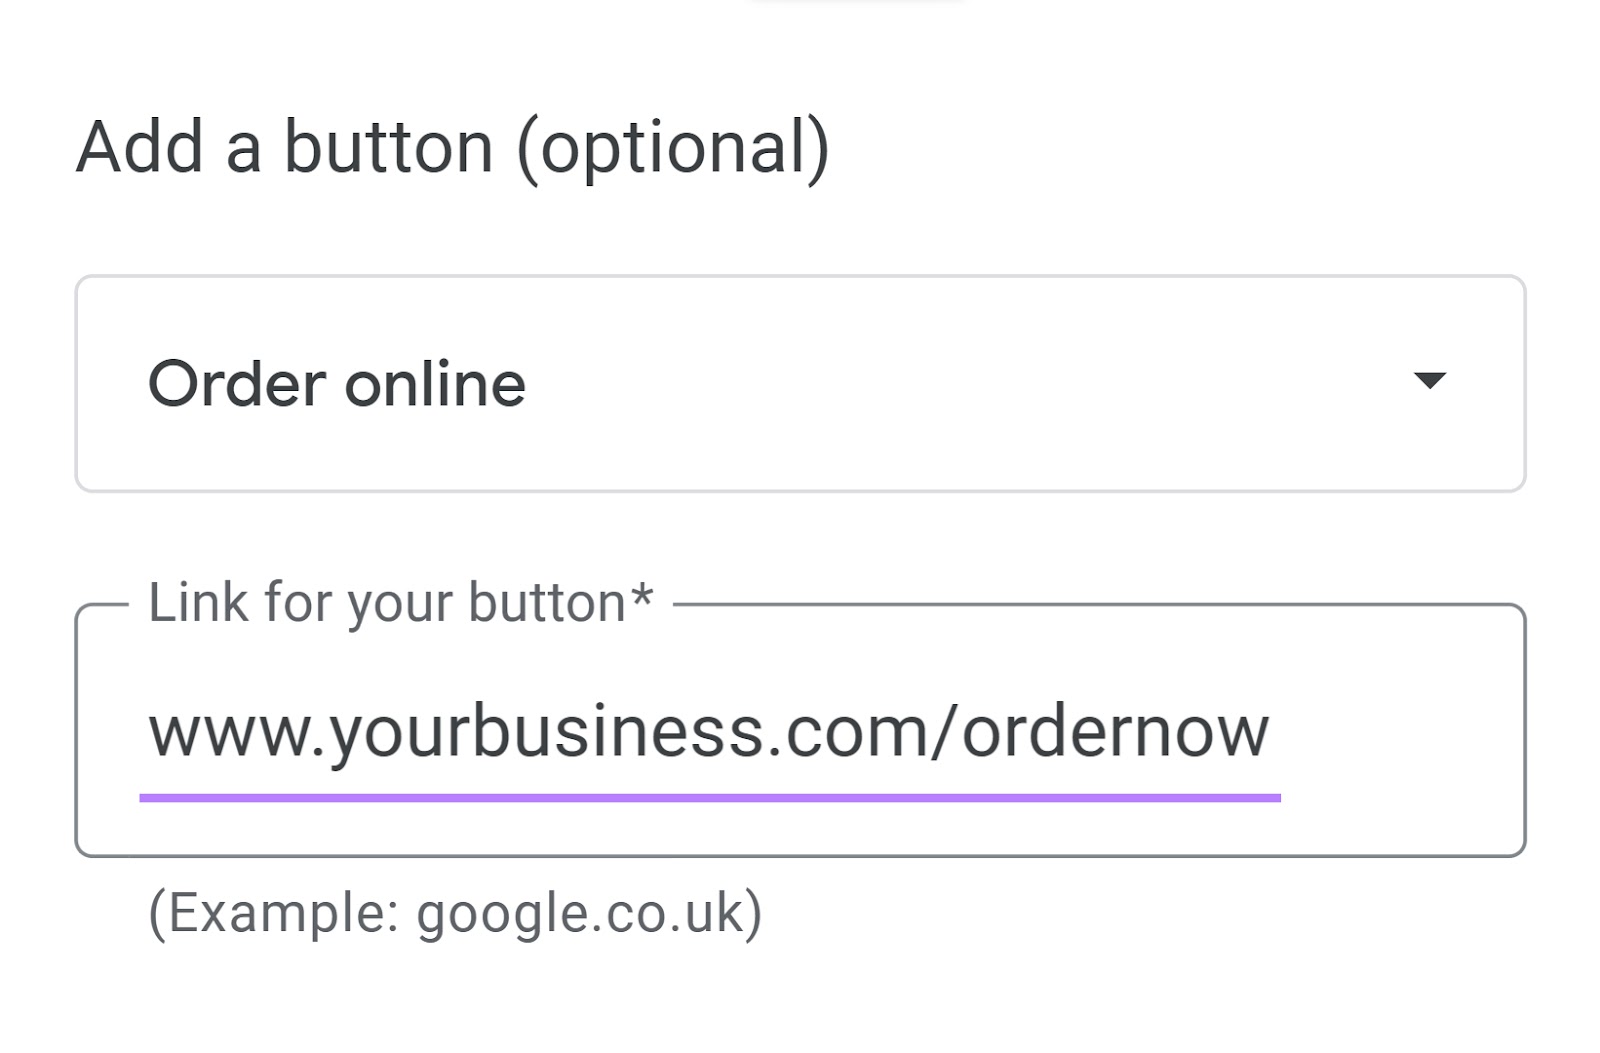 "www.yourbusiness.com/ordernow" added under link for your button